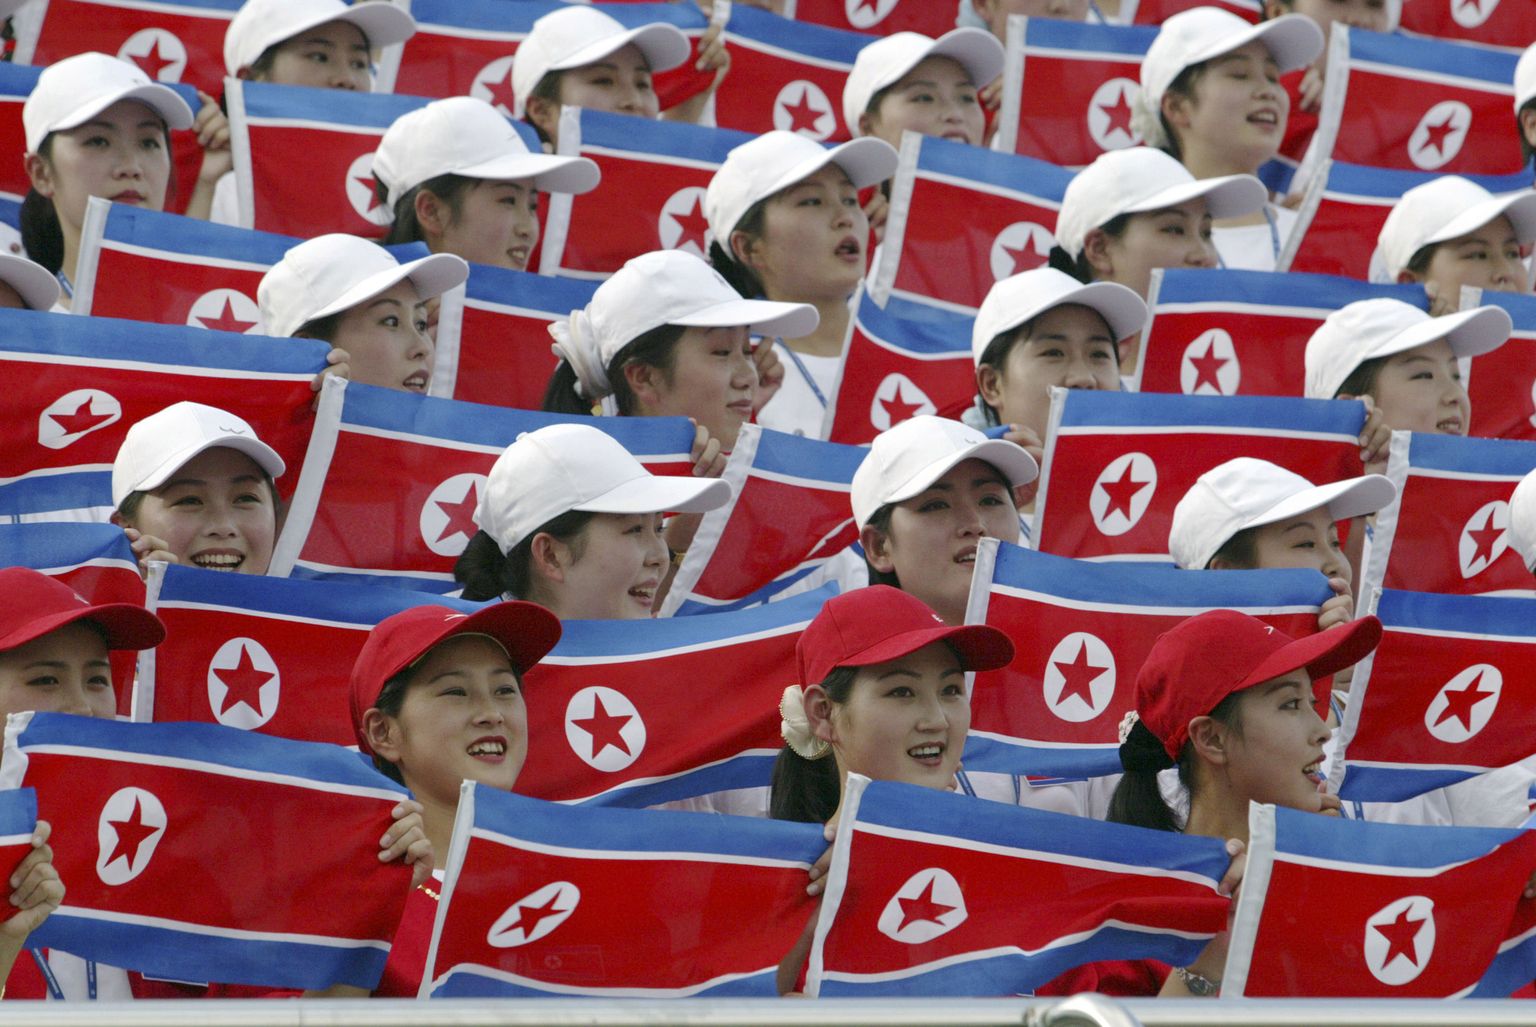 FILE - In this Aug. 28, 2003 file photo, North Korean women hold national flags to cheer at the Daegu Universiade Games in Daegu, South Korea. Sports ties between the rival Koreas often mirror their rocky political ties. North Korea participated in the University Games in Daegu, South Korea in 2003, and its athletes walked again with South Korean counterparts at the opening and closing ceremonies. (AP Photo/Lee Jin-man, File)